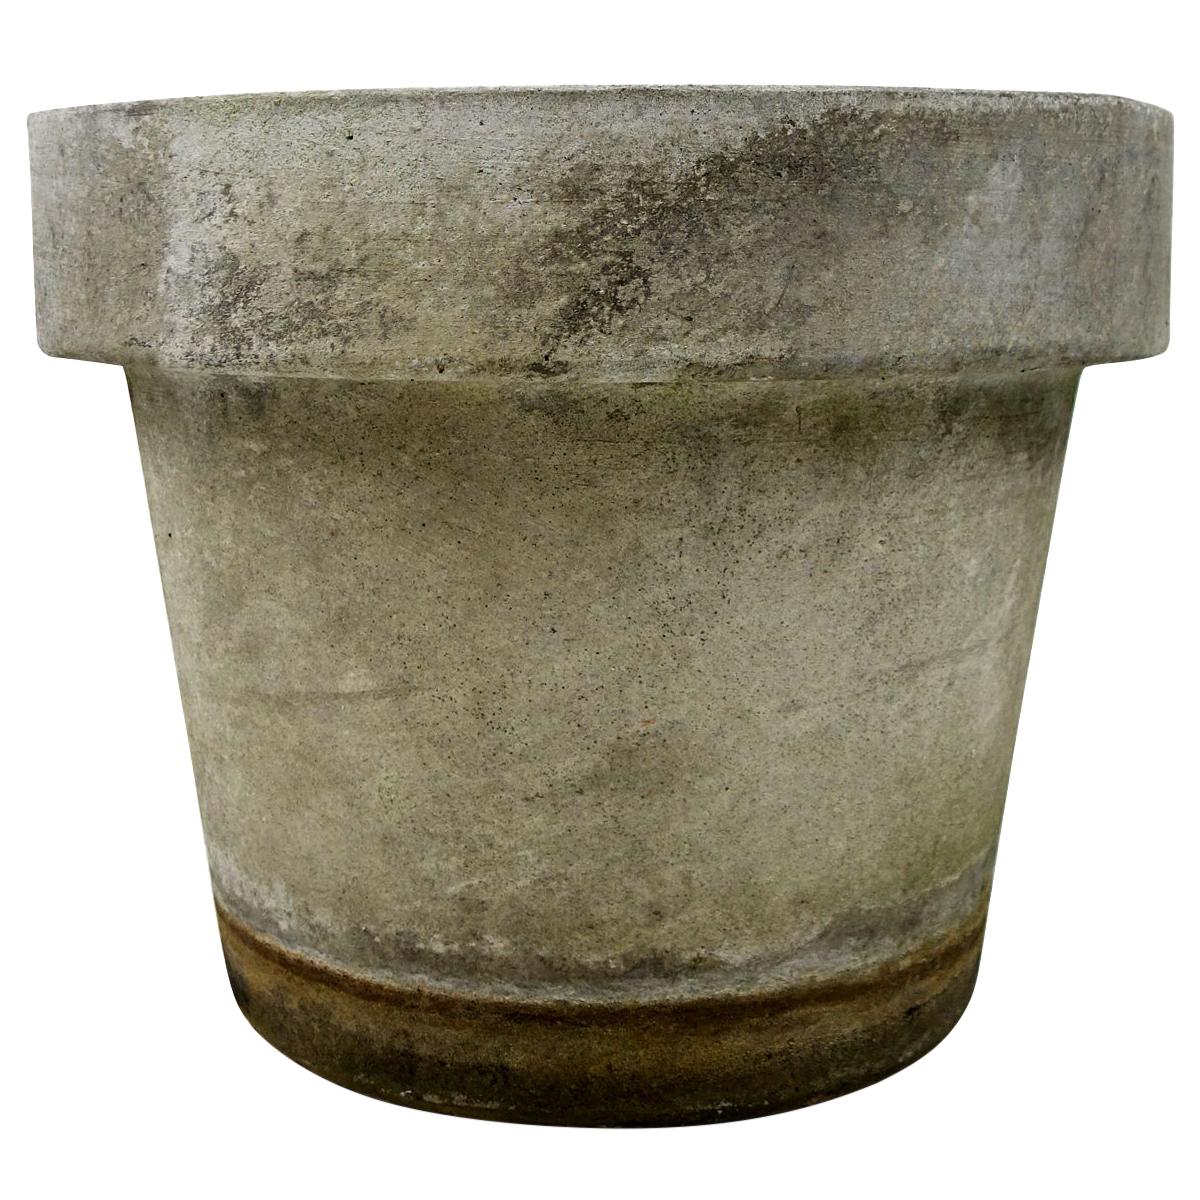 Mid-Century Modern Planter in the Shape of Flower Pot by Willy Guhl for Eternit